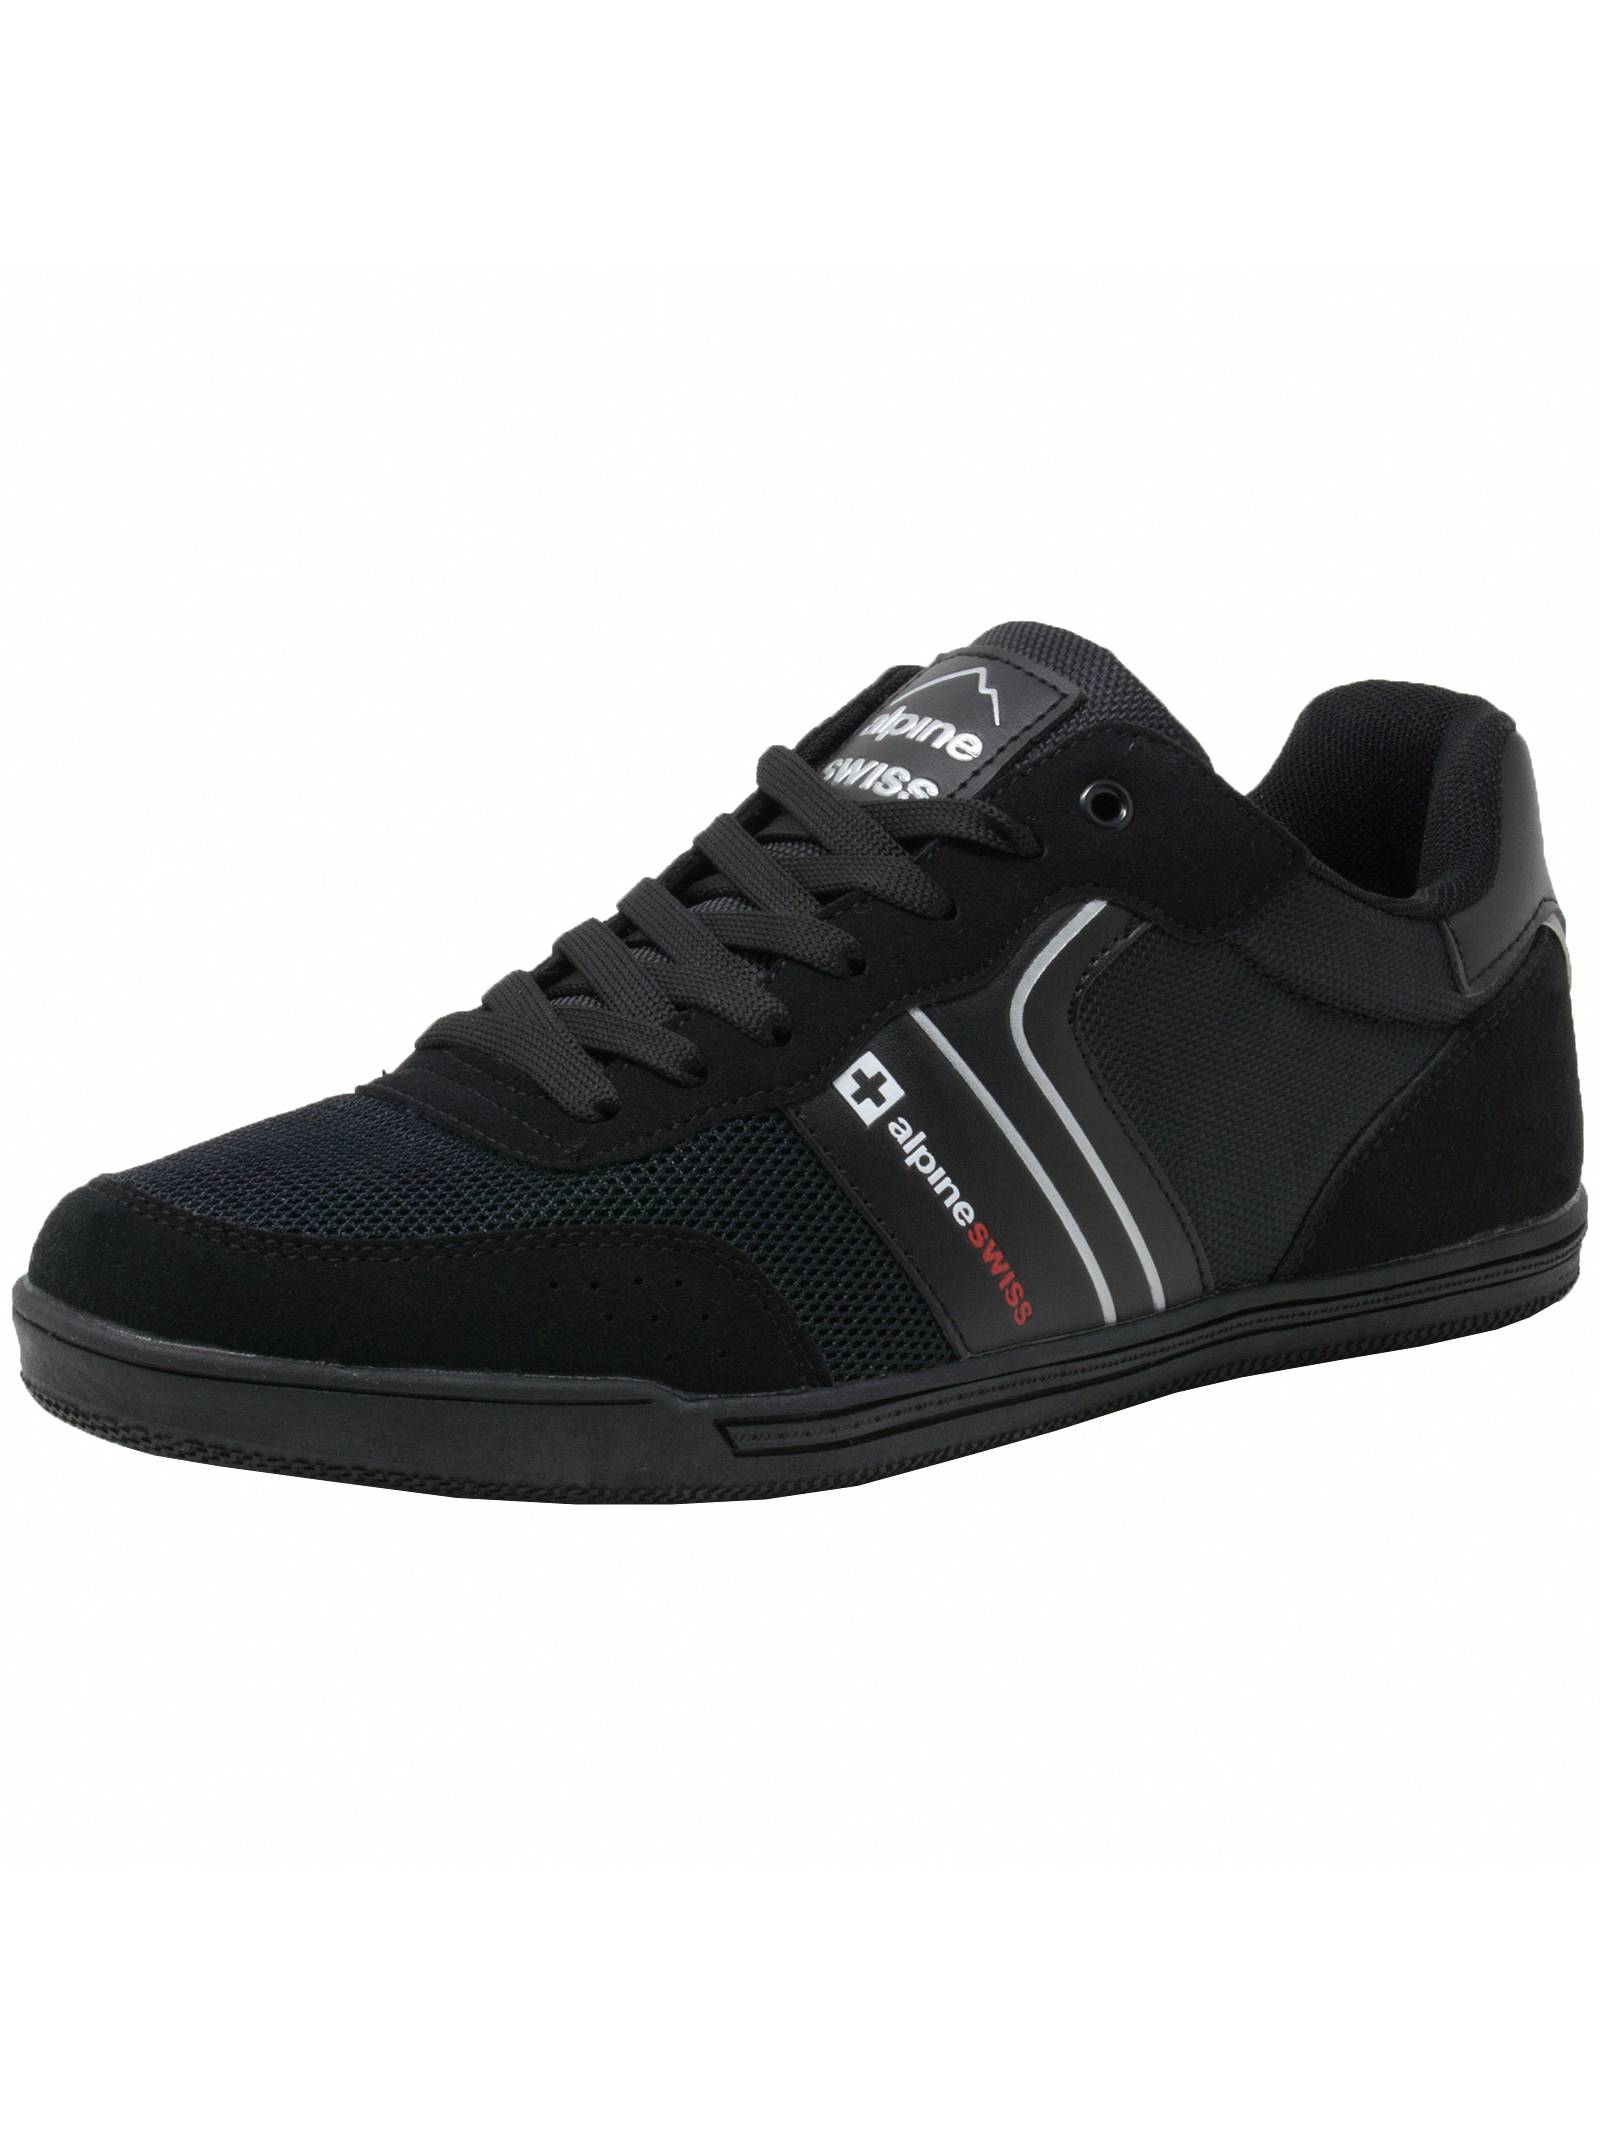 Alpine Swiss Liam Mens Fashion Sneakers Suede Trim Low Top Lace Up Tennis Shoes - image 1 of 7